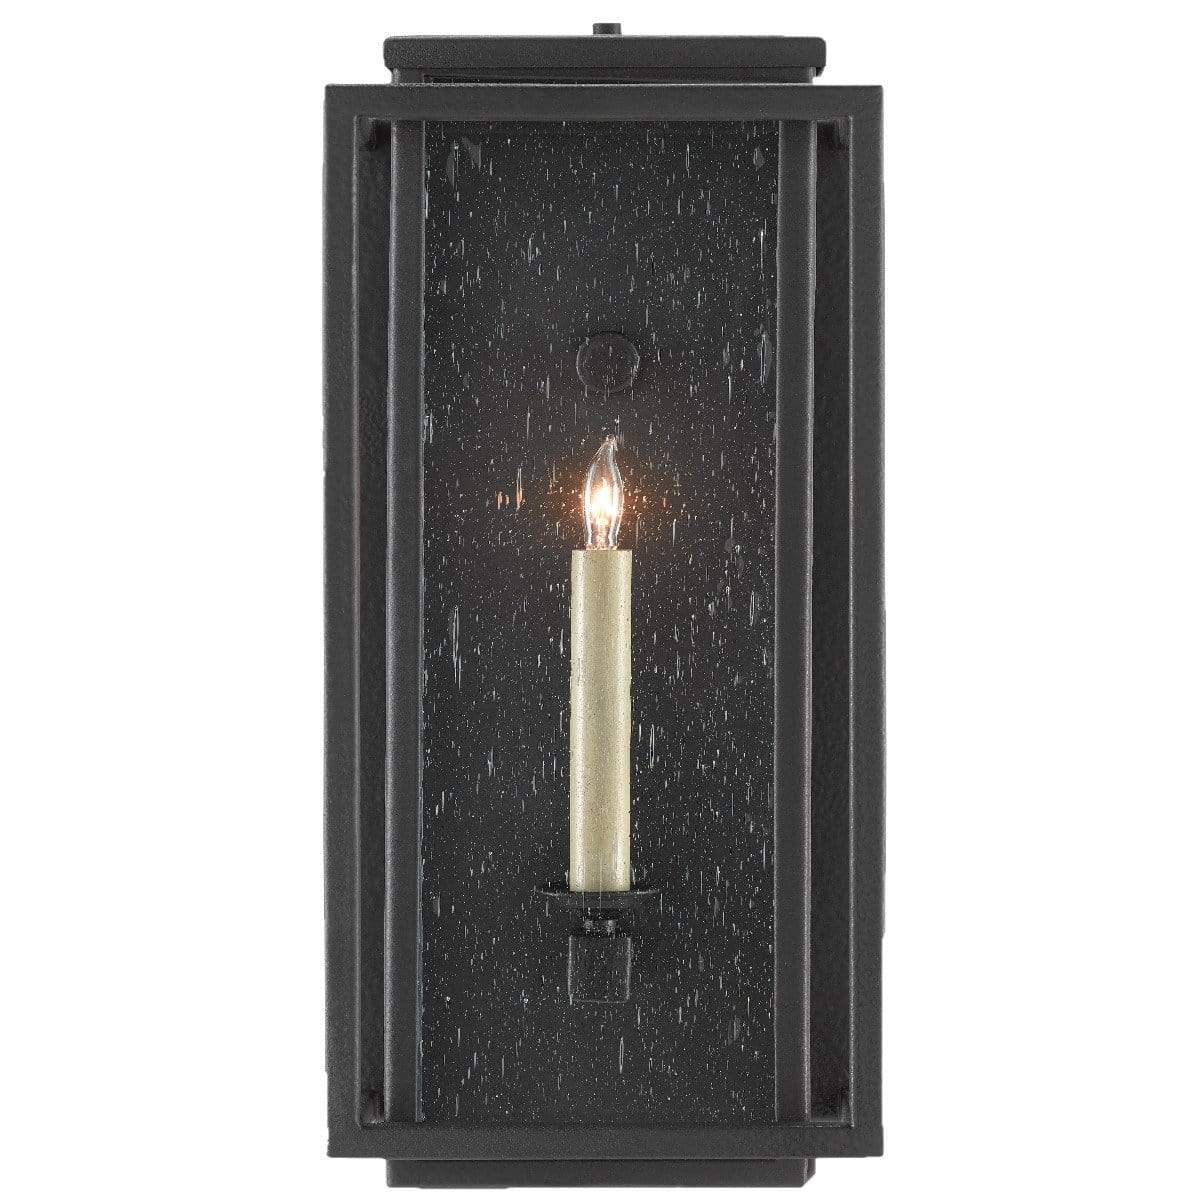 Currey and Company Wright Outdoor Wall Sconce Lighting currey-co-5500-0040